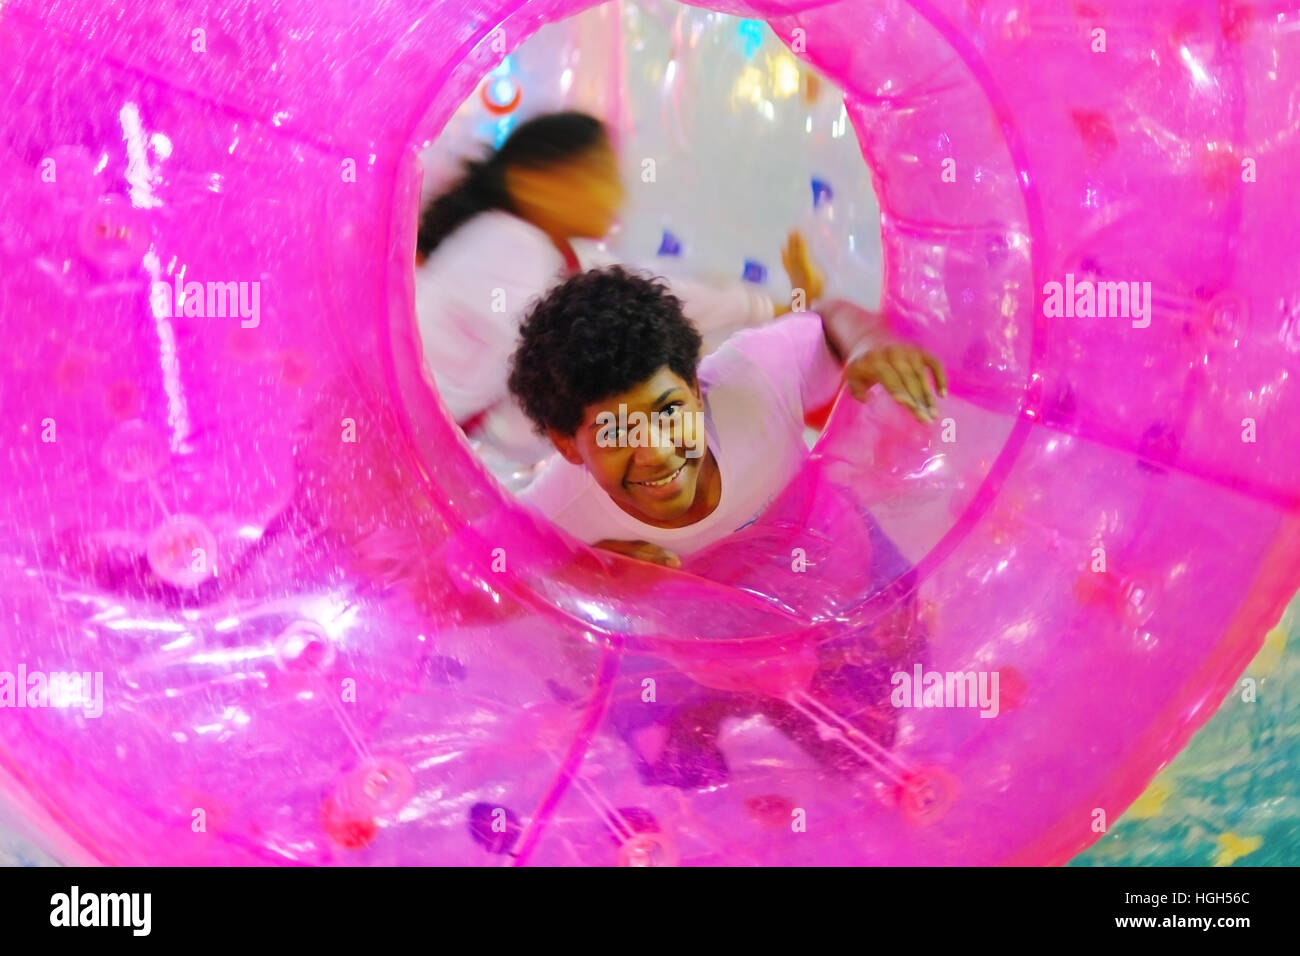 Two little boys have fun and laugh in a Water Ball colored Stock Photo